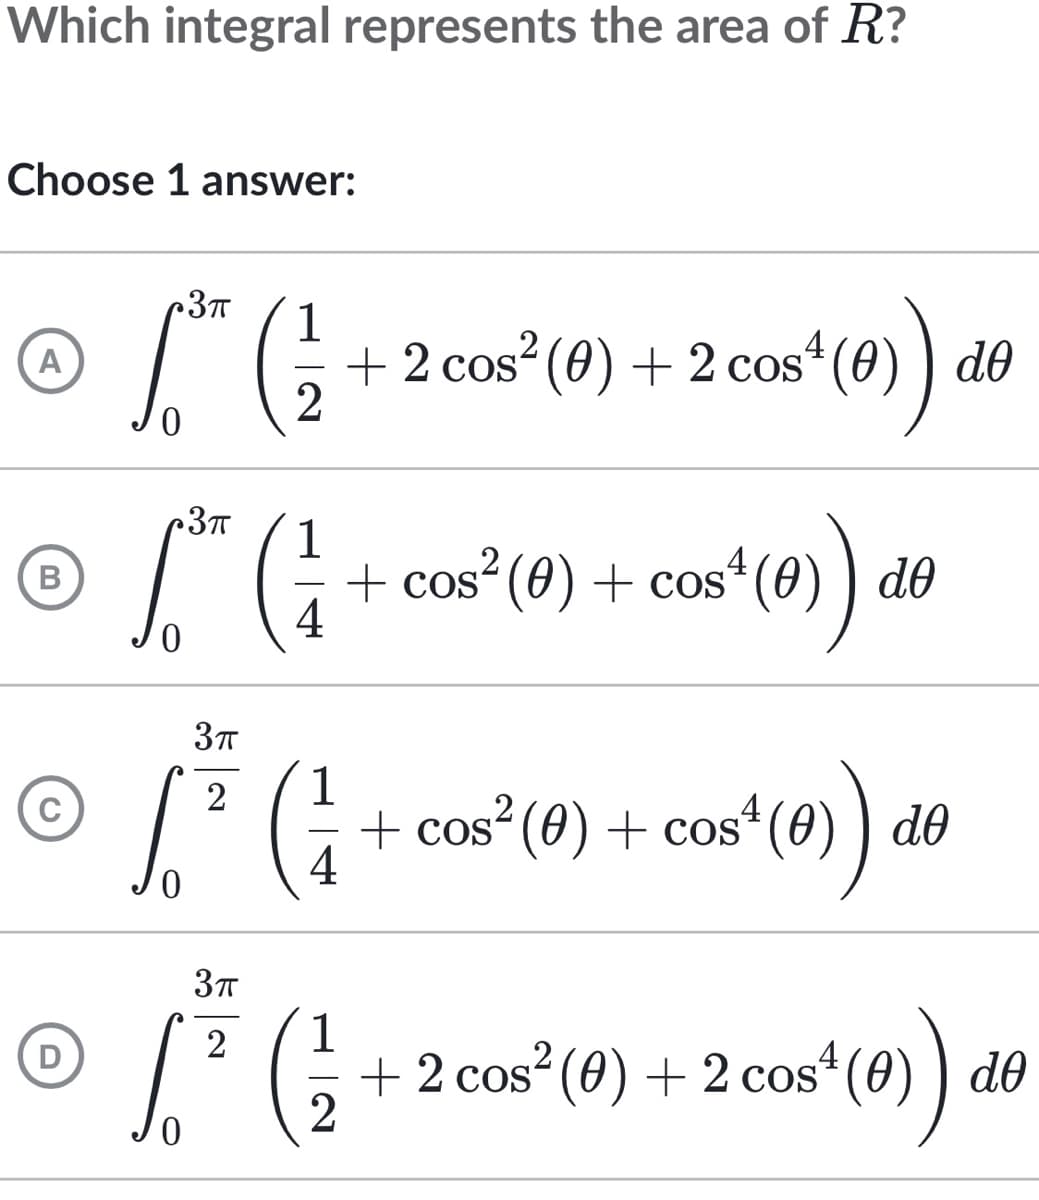 Which integral represents the area of R?
Choose 1 answer:
•3π
4
A
6.5 (²1 + 2 cos² (0) + 2 cos*¹ (0)) d6
2
•3π
4
Ⓒ ³ (1 + cos² (0) + cos² (4) ) de
B
4
3π
√ ²³ ( ²7 + cos² (0) + cos² (0) do
3π
2
D
Ⓒ / ² ( ² + 2 cos² (0) + 2 cos¹ (0)) de
cos* (0)) de
a